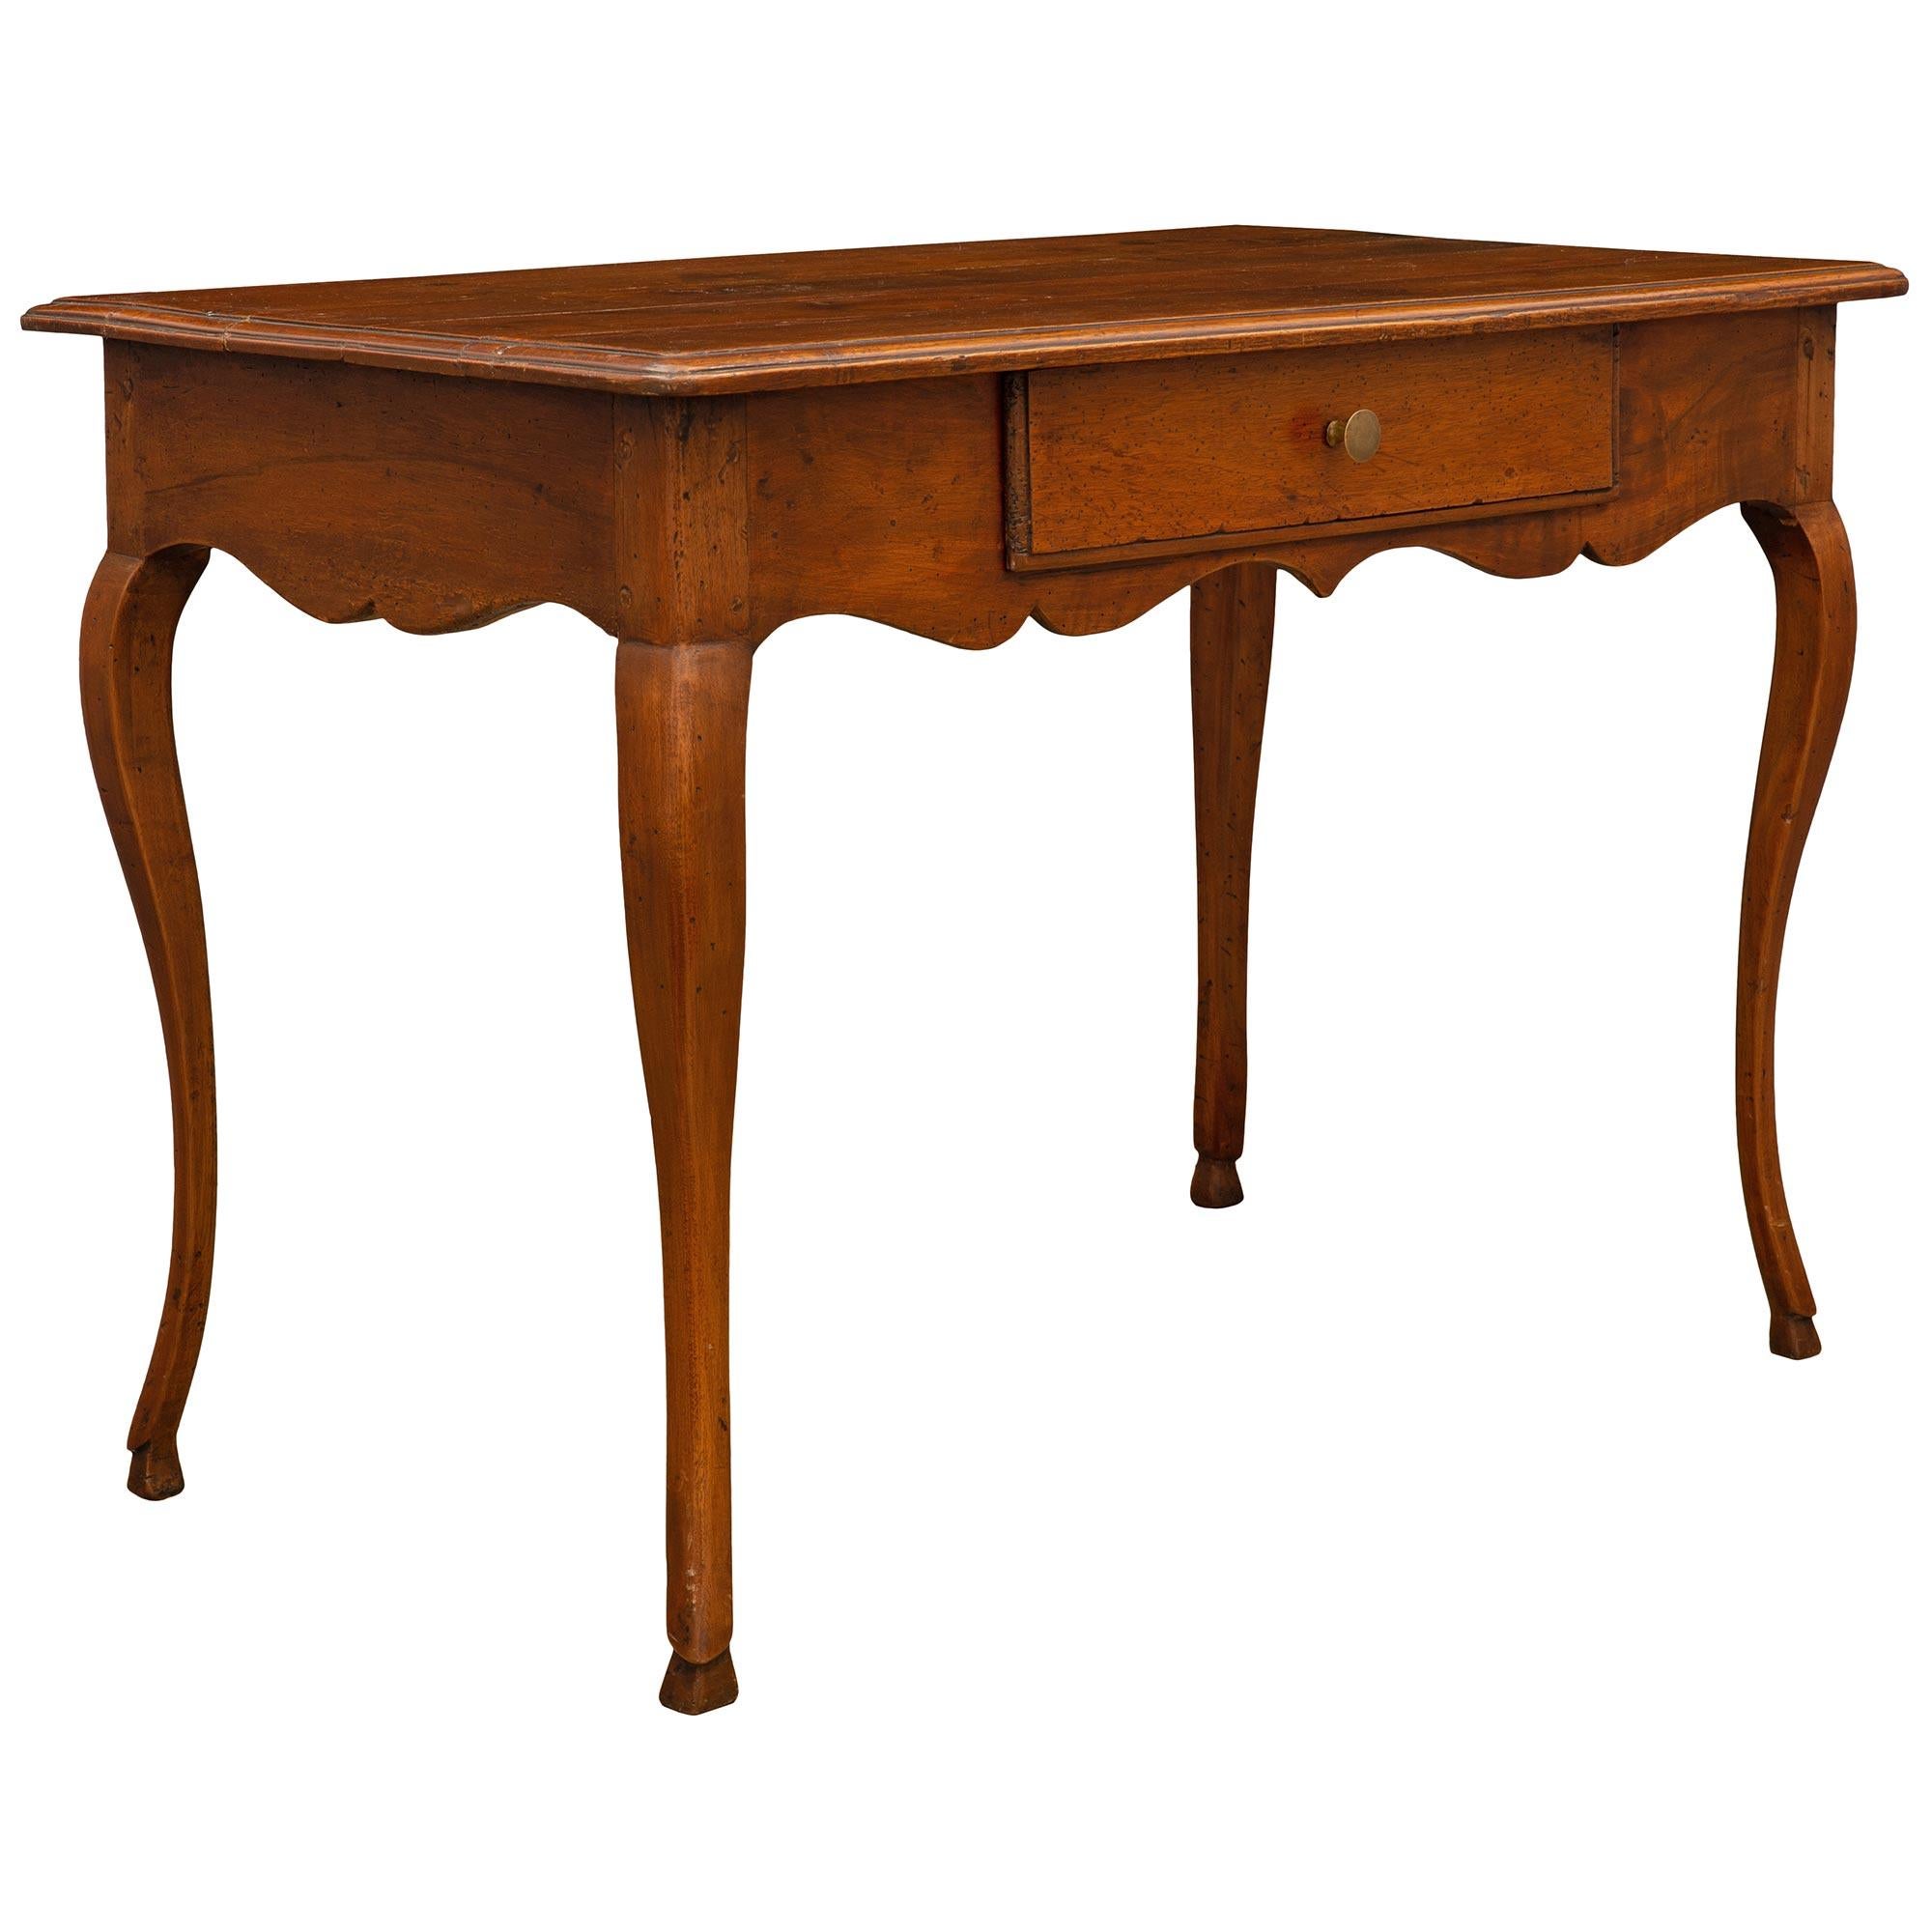 A charming and very elegant French late 18th century Louis XV period oak desk/side table. The table is raised by lovely slender cabriole legs with fine hoof feet. The apron displays a most decorative scalloped shape repeated at each side while the